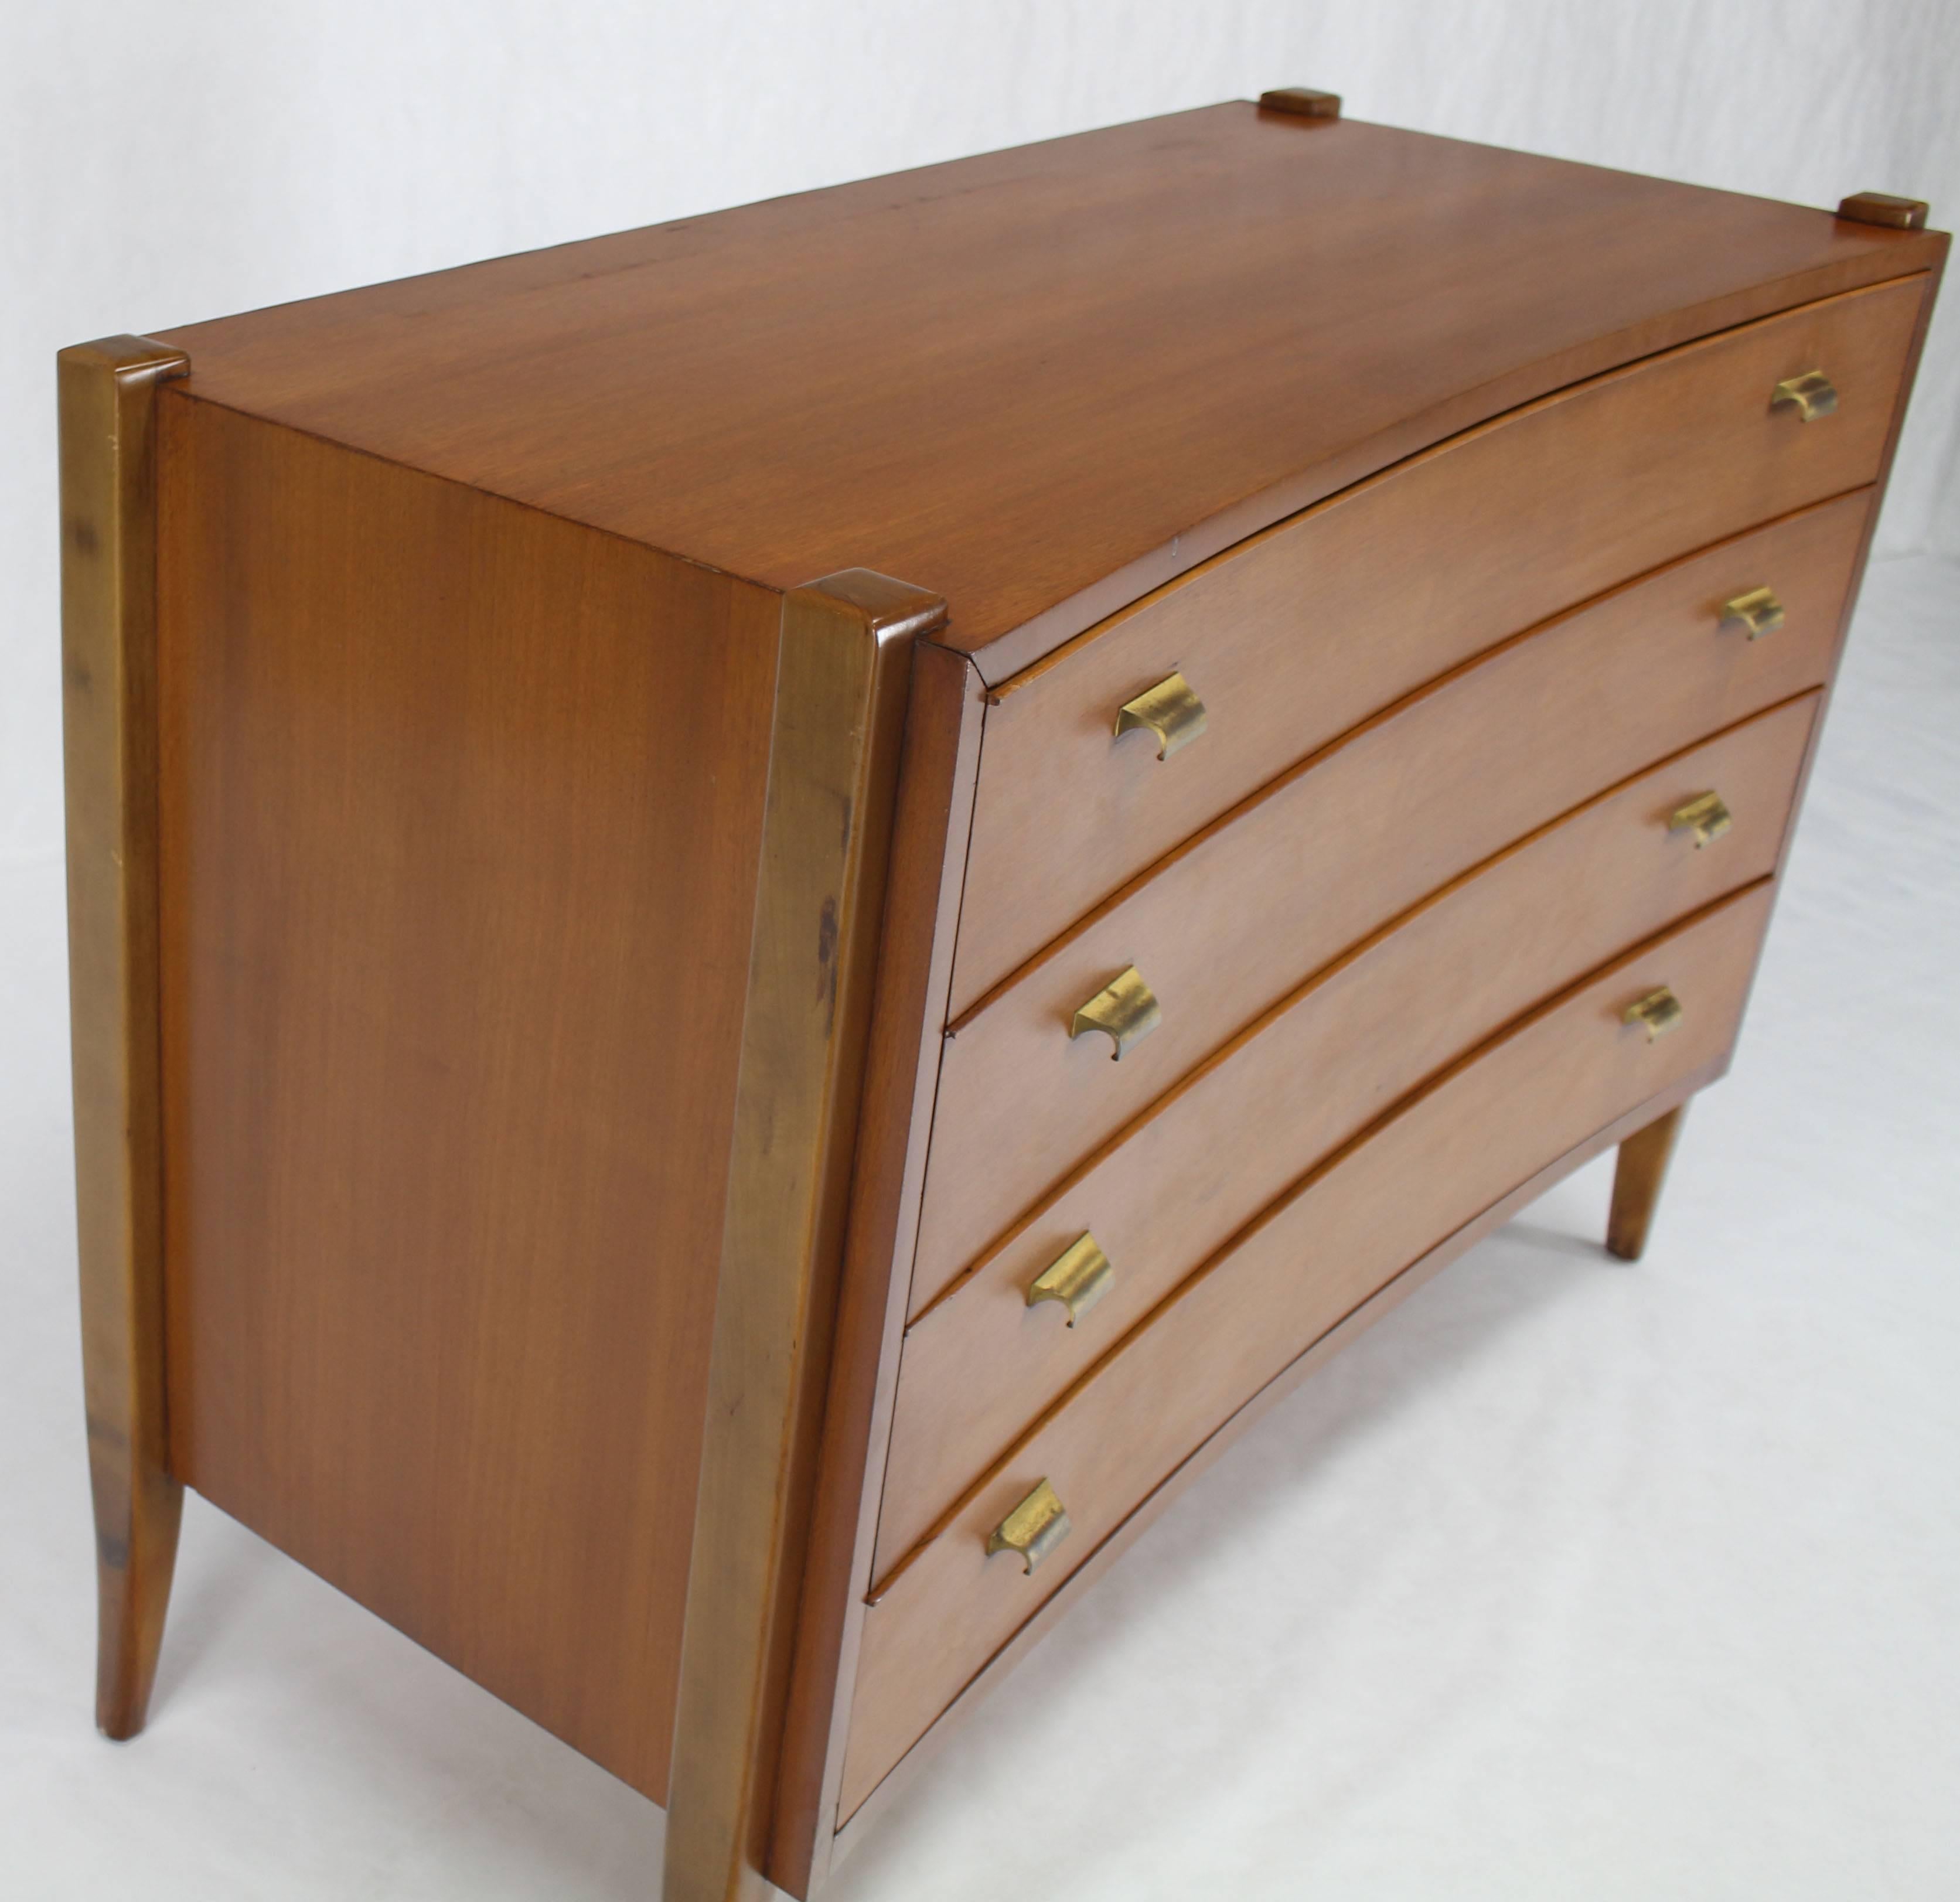 Cherry sculpted exposed legs bow front Mid-Century Modern dresser chest credenza cabinet.